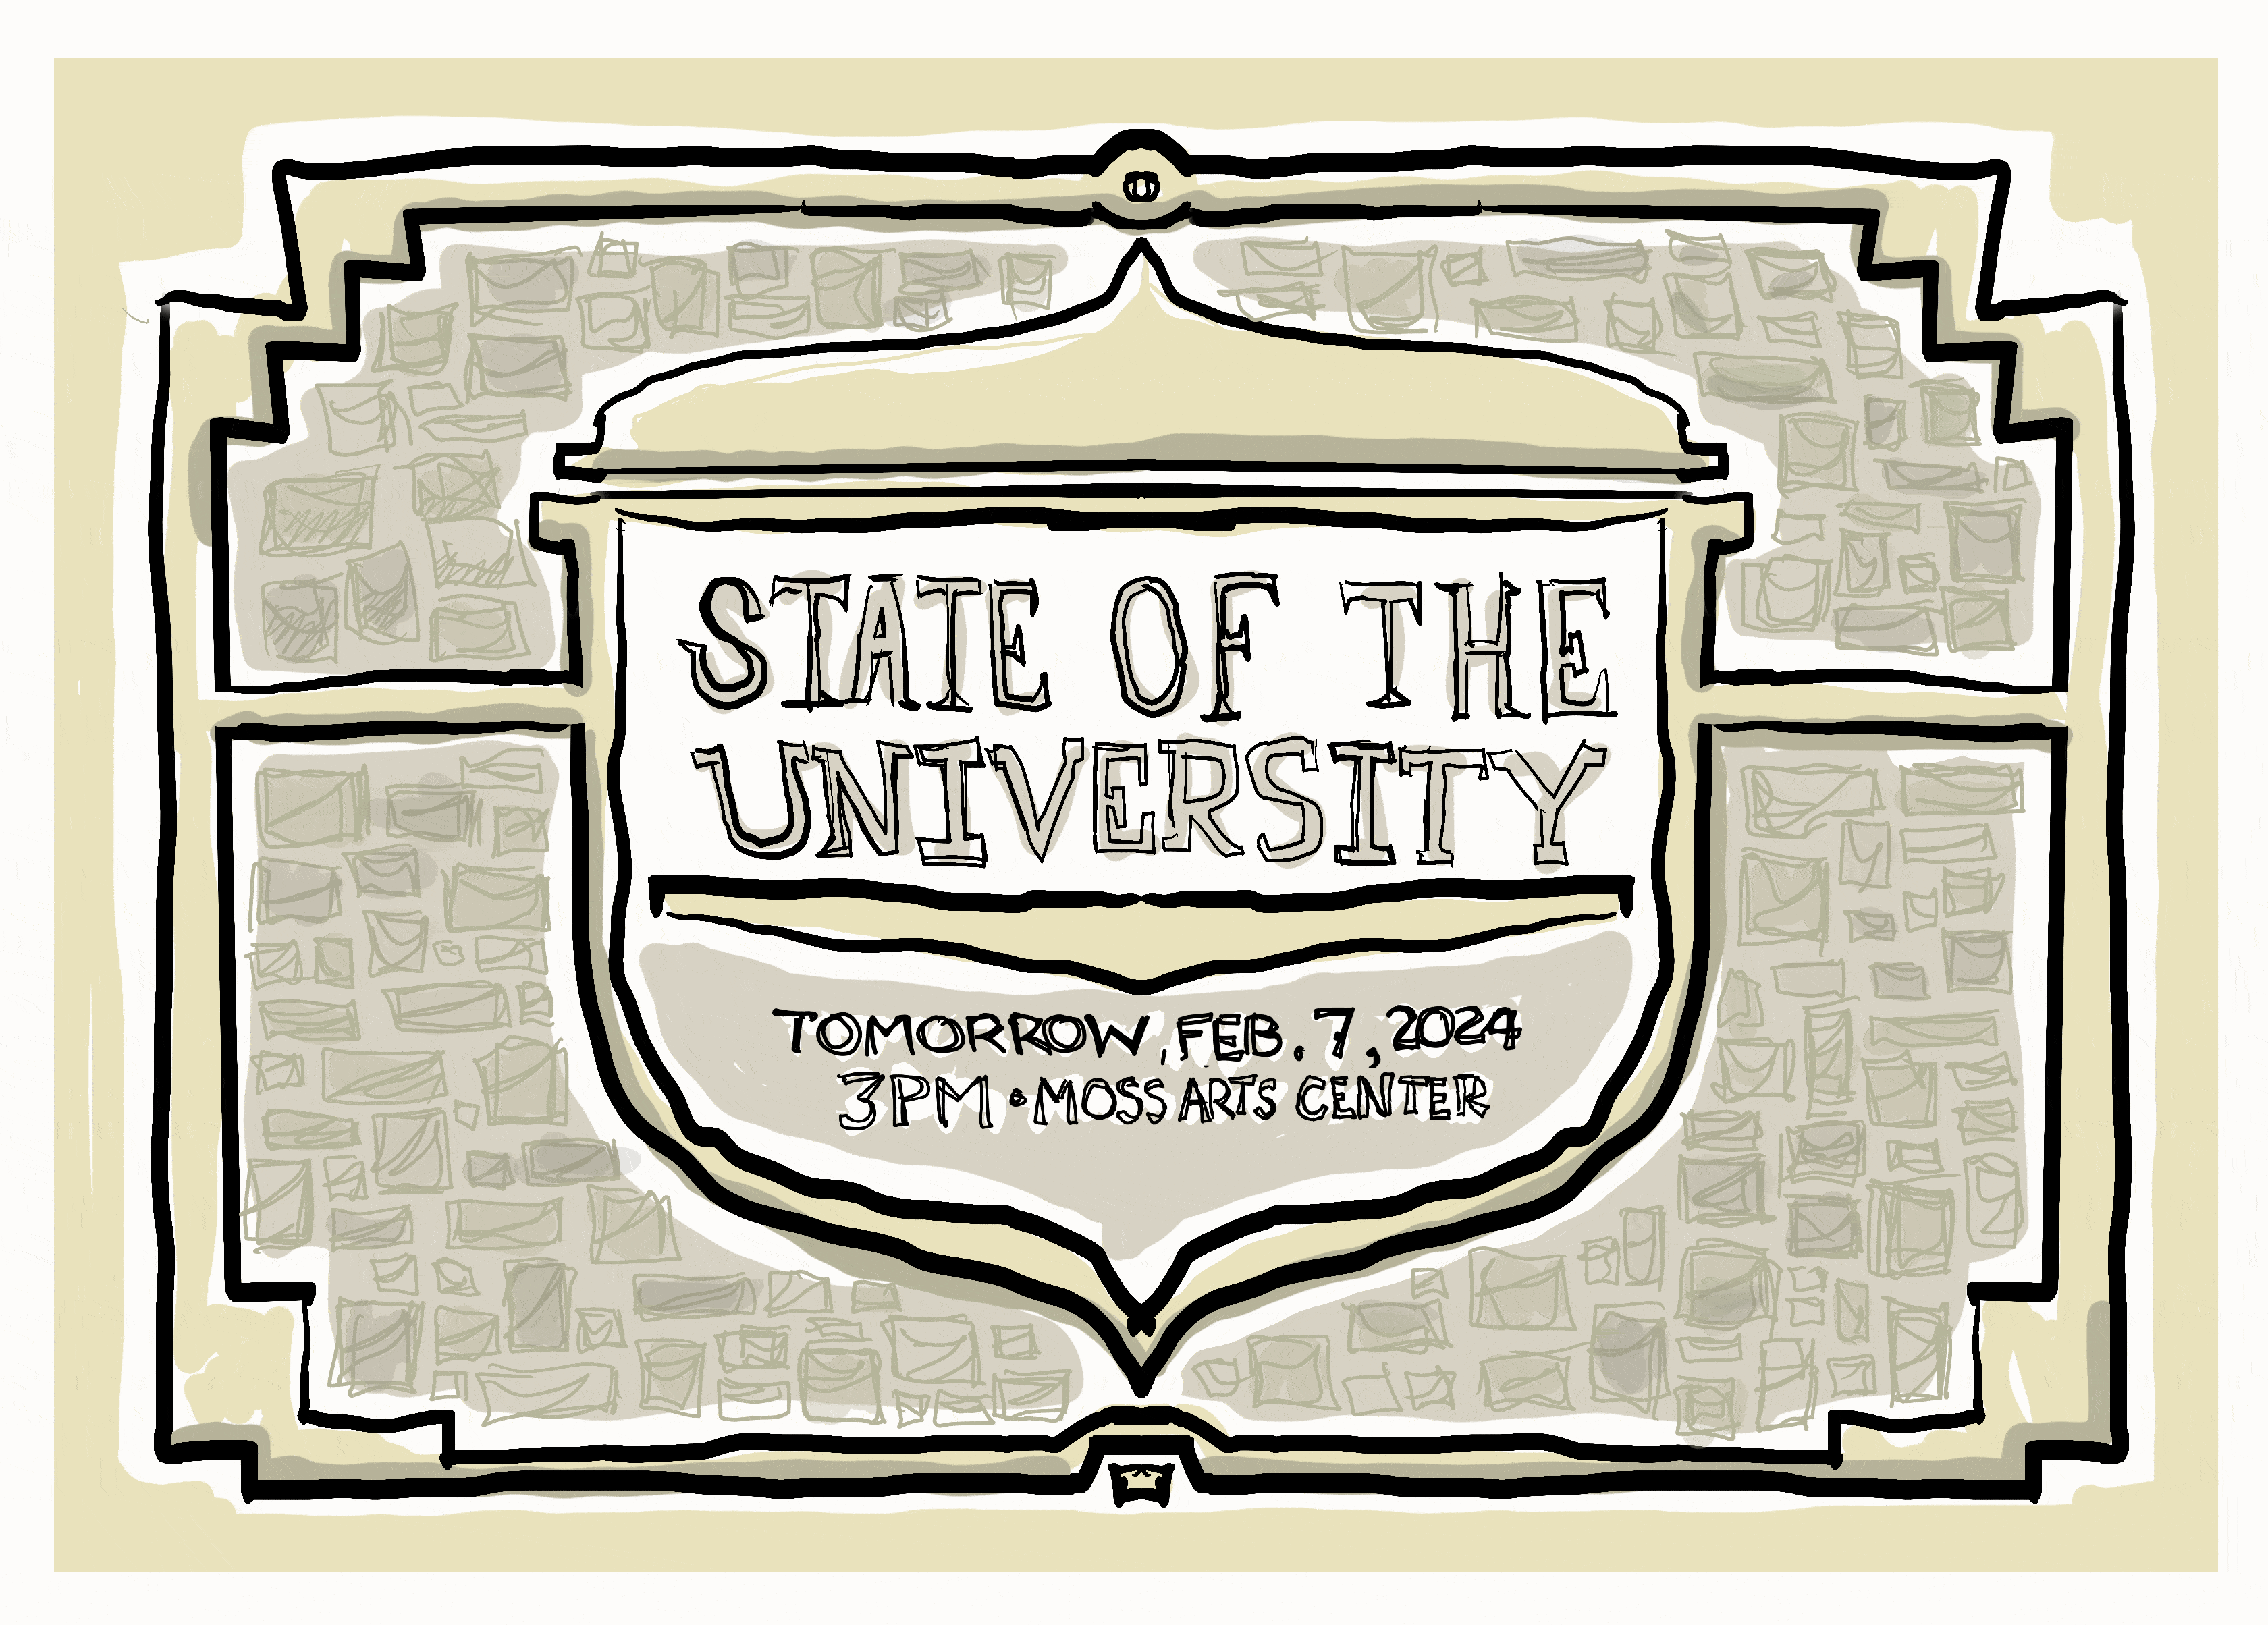 Digital sketch reminder.... state of the iniversity is tomorrow feb 7 at 3pm